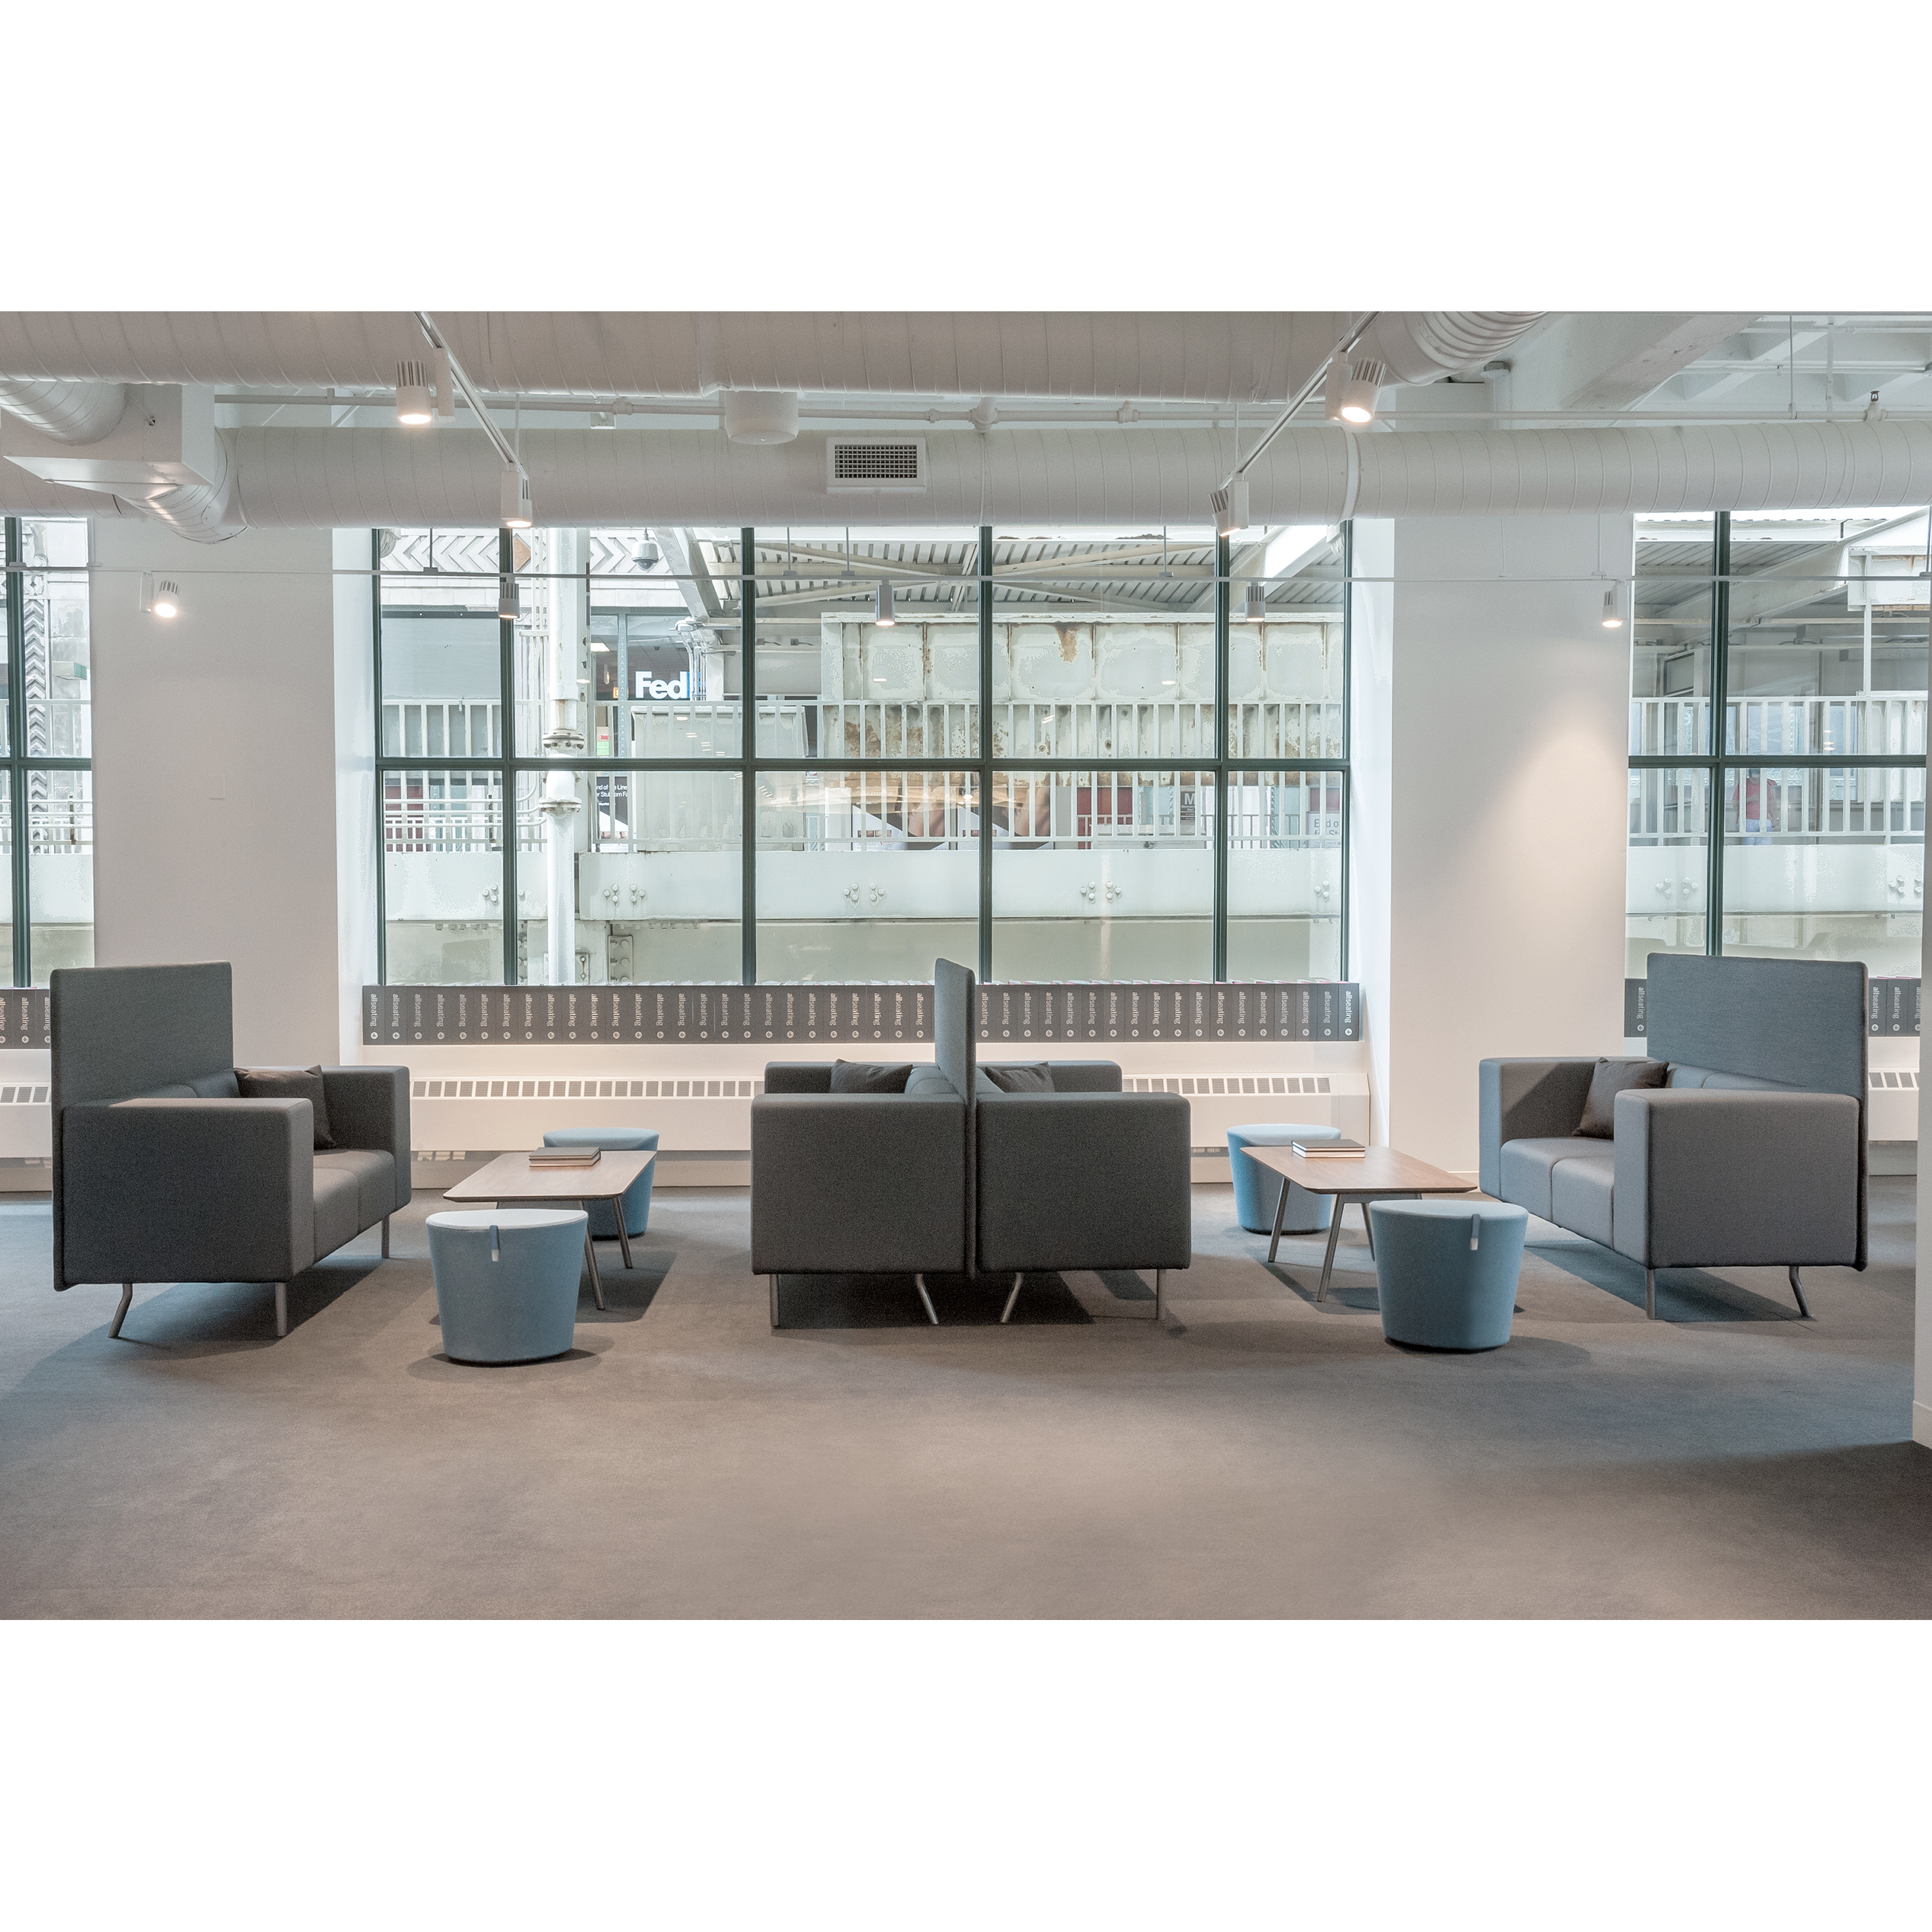 Good seating can significantly enhance health and care environments